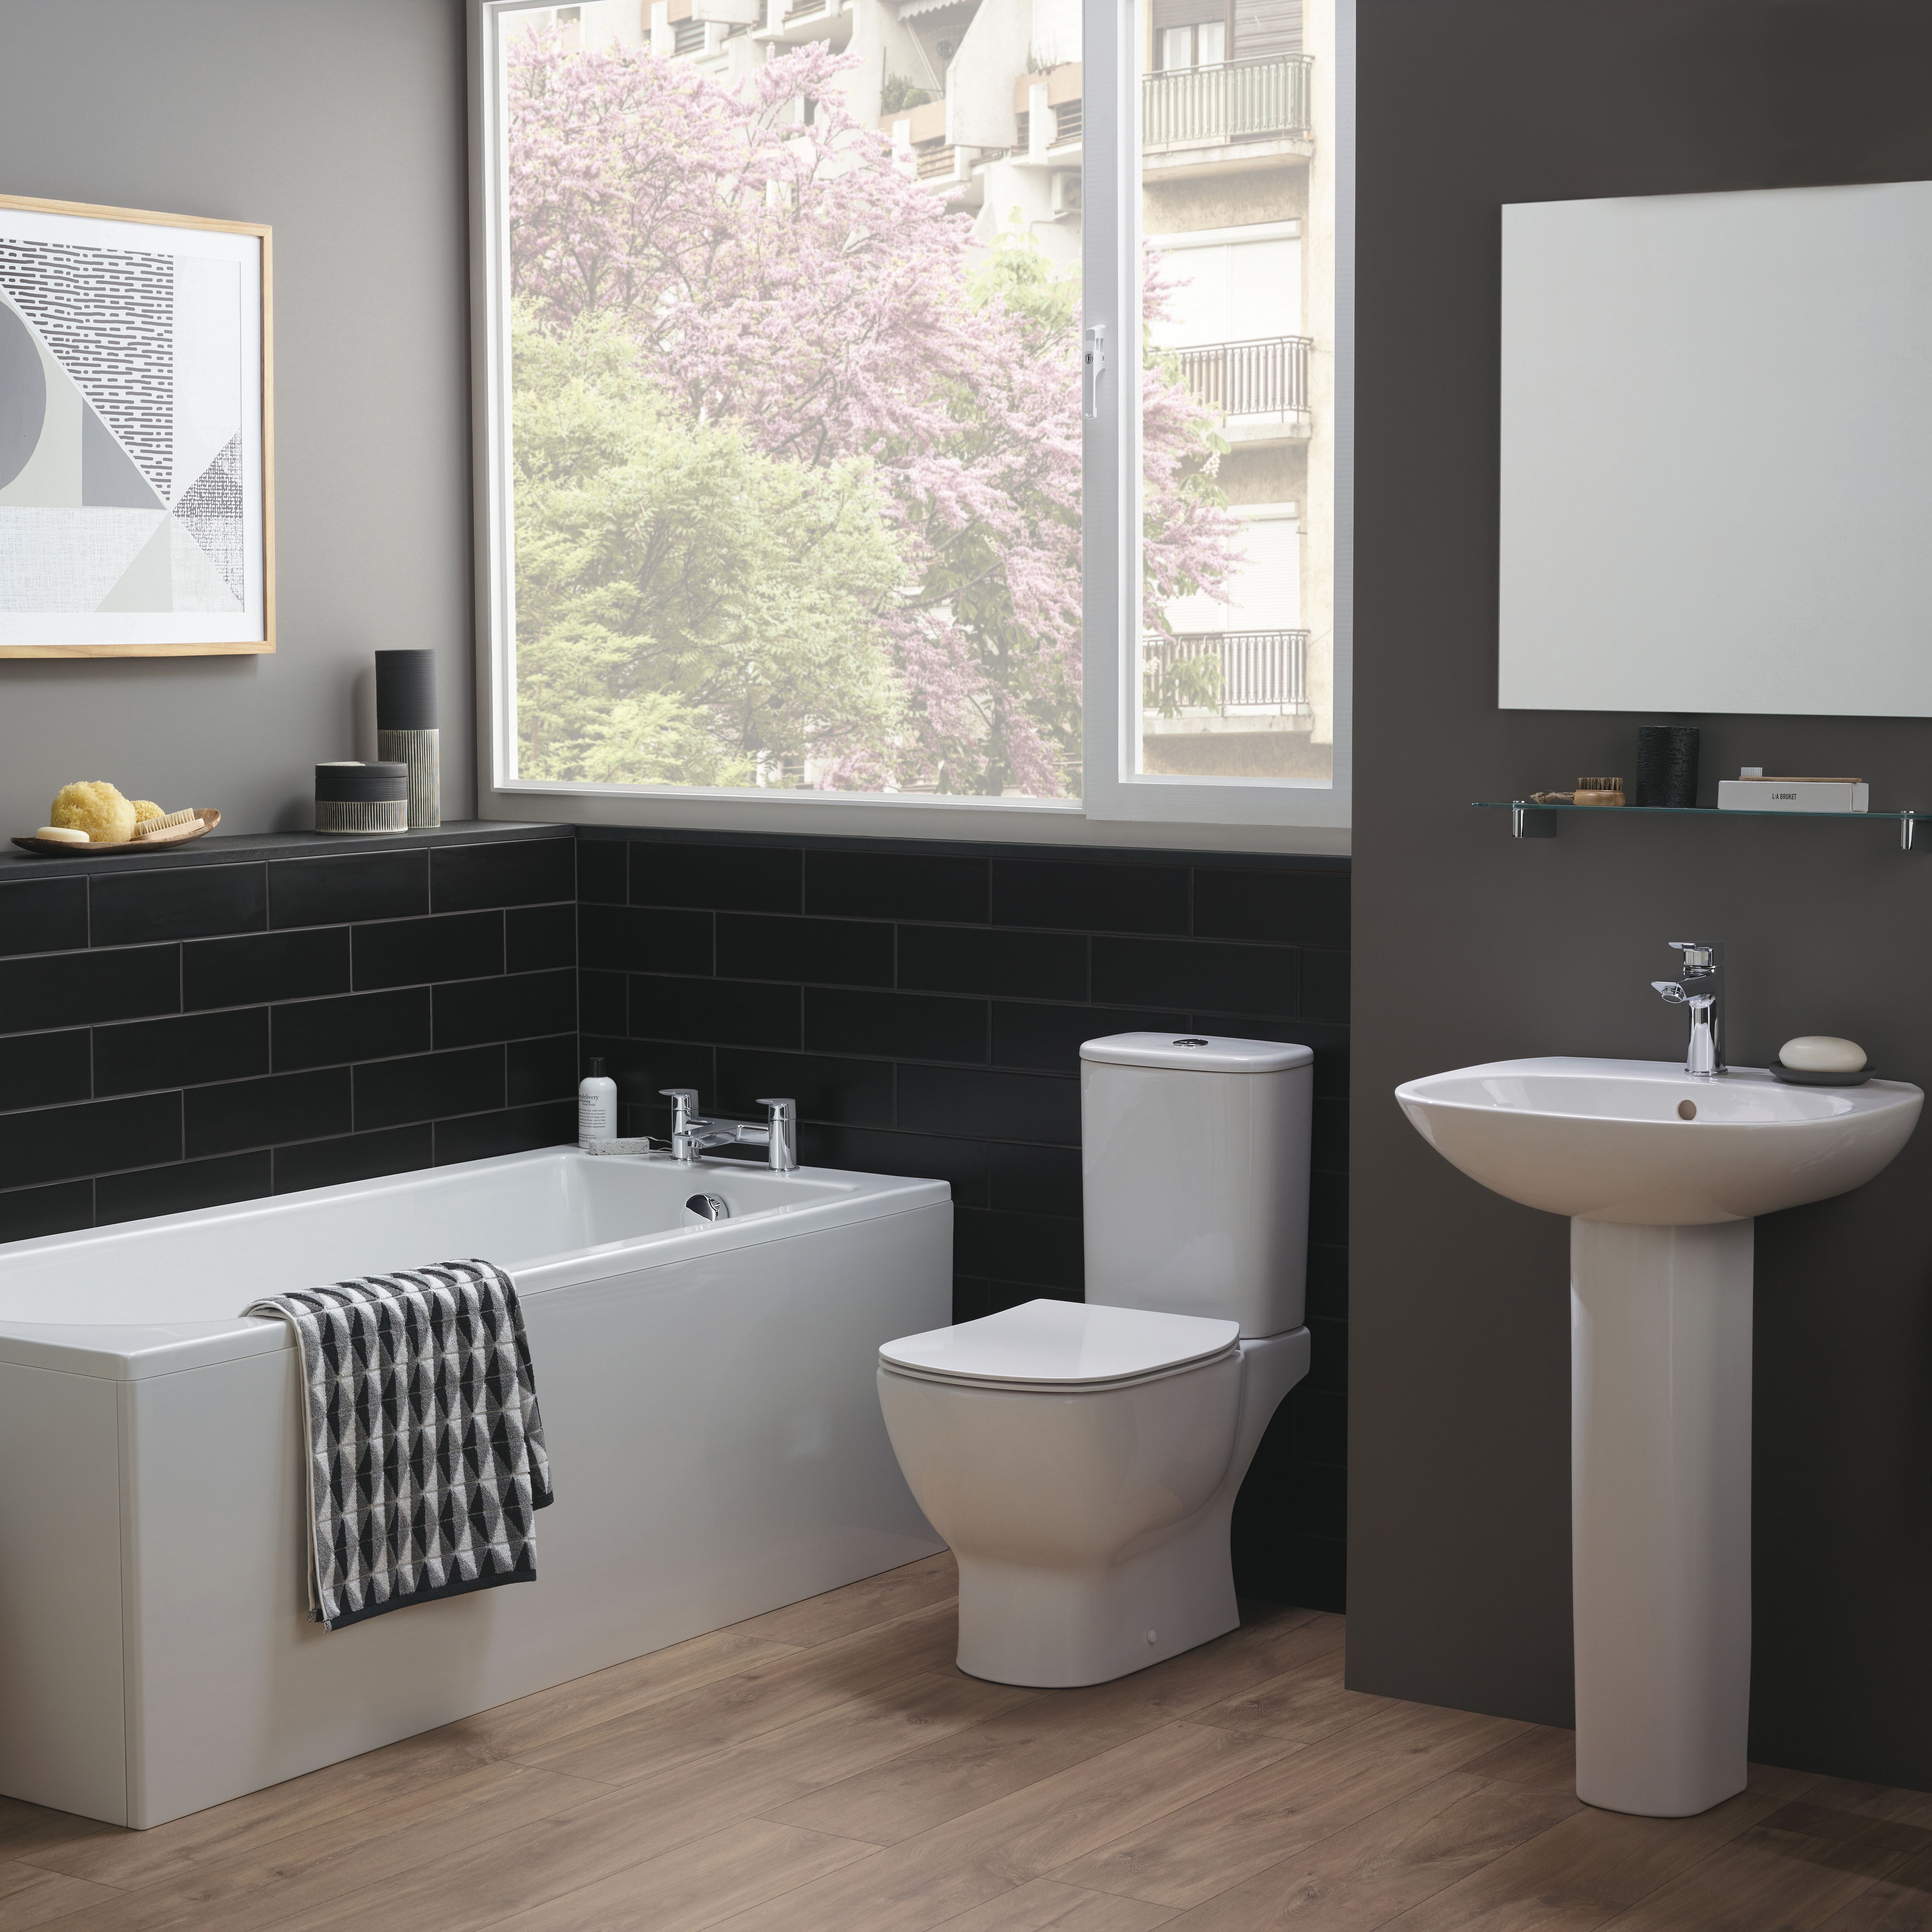 Ideal Standard Tesi White Close-coupled Toilet set with Soft close seat